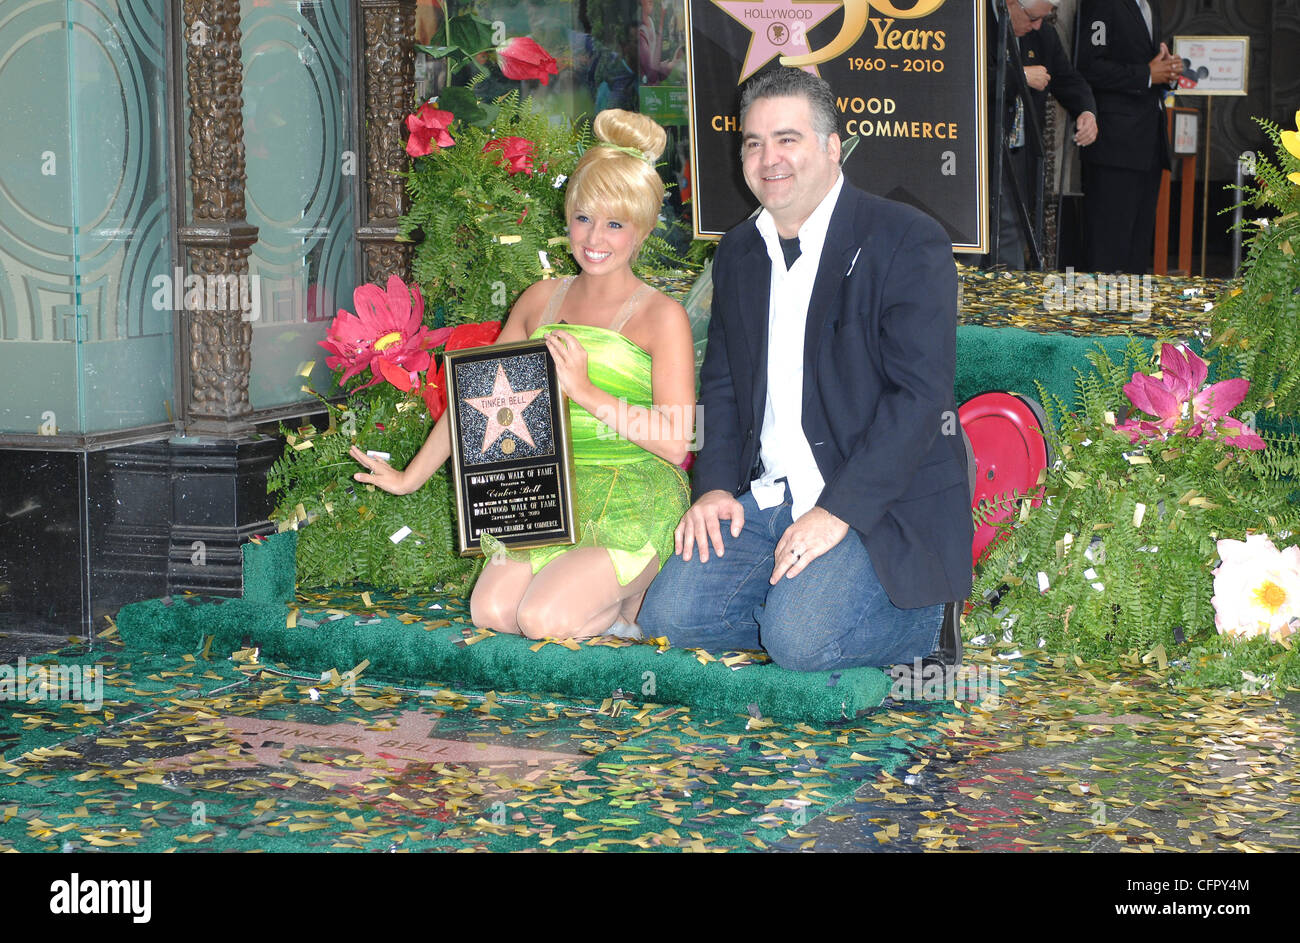 Tinker Bell The 2,418th star on the Hollywood Walk of Fame  Los Angeles, California - 21.09.10 Stock Photo